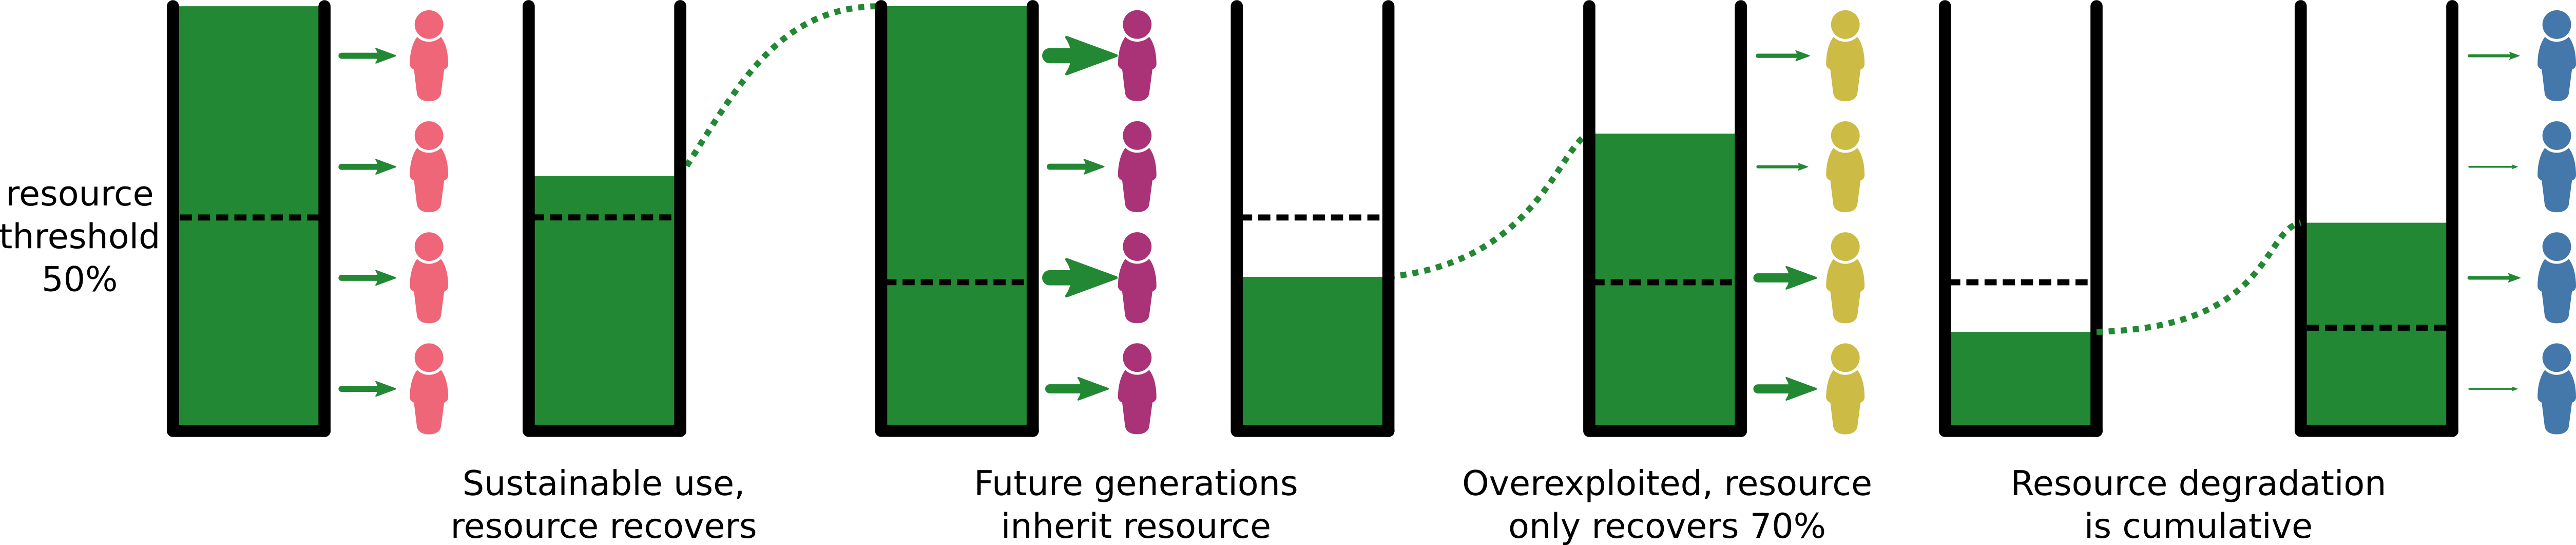 Figure 1. An example of an intergenerational common-pool resource game.